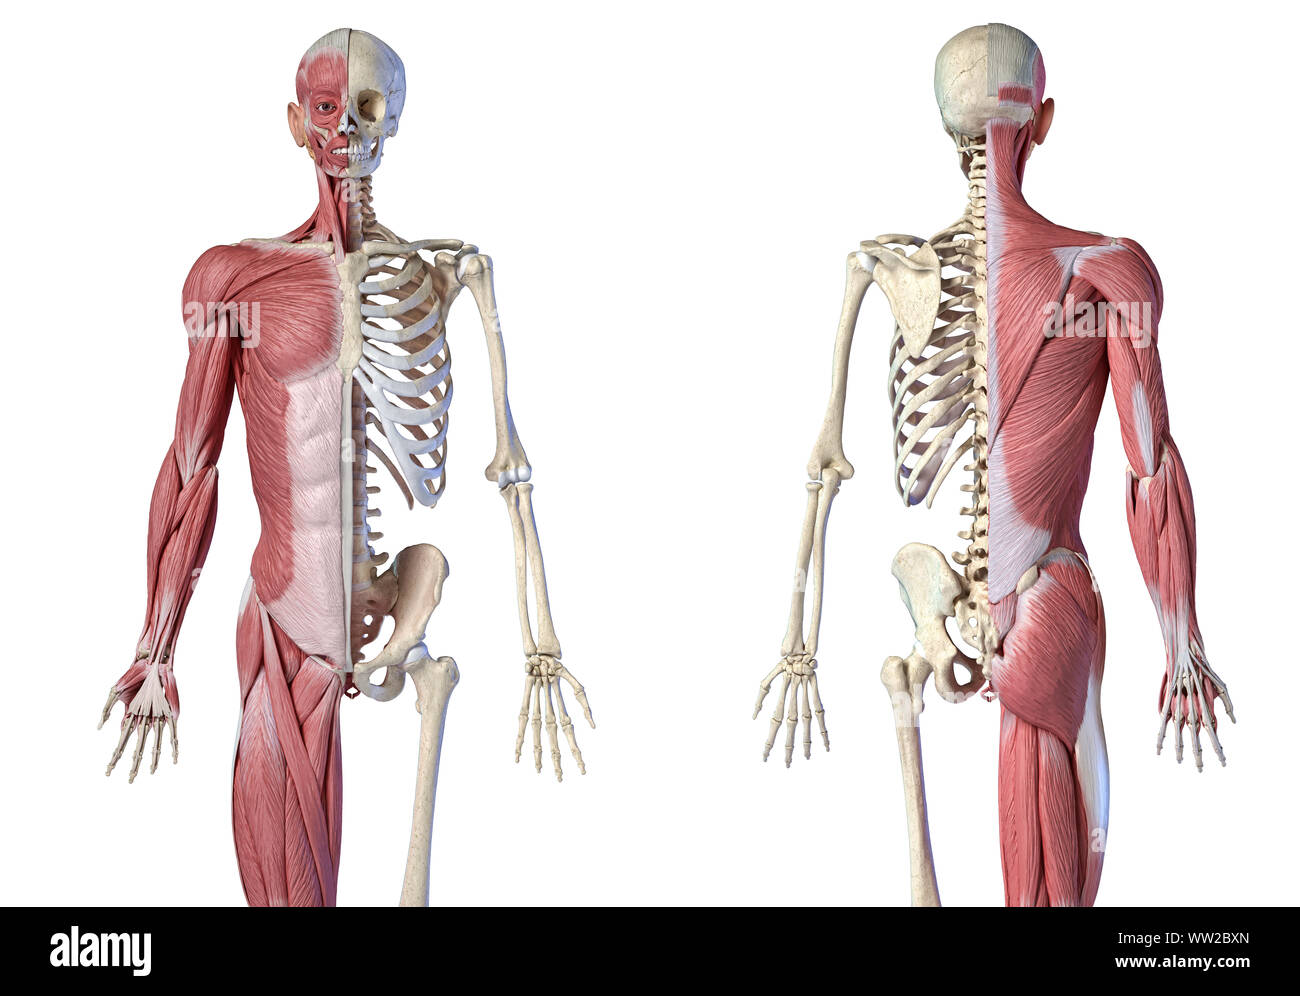 Human male anatomy, 3/4 figure muscular and skeletal systems, front and back views on white background. 3d anatomy illustration. Stock Photo